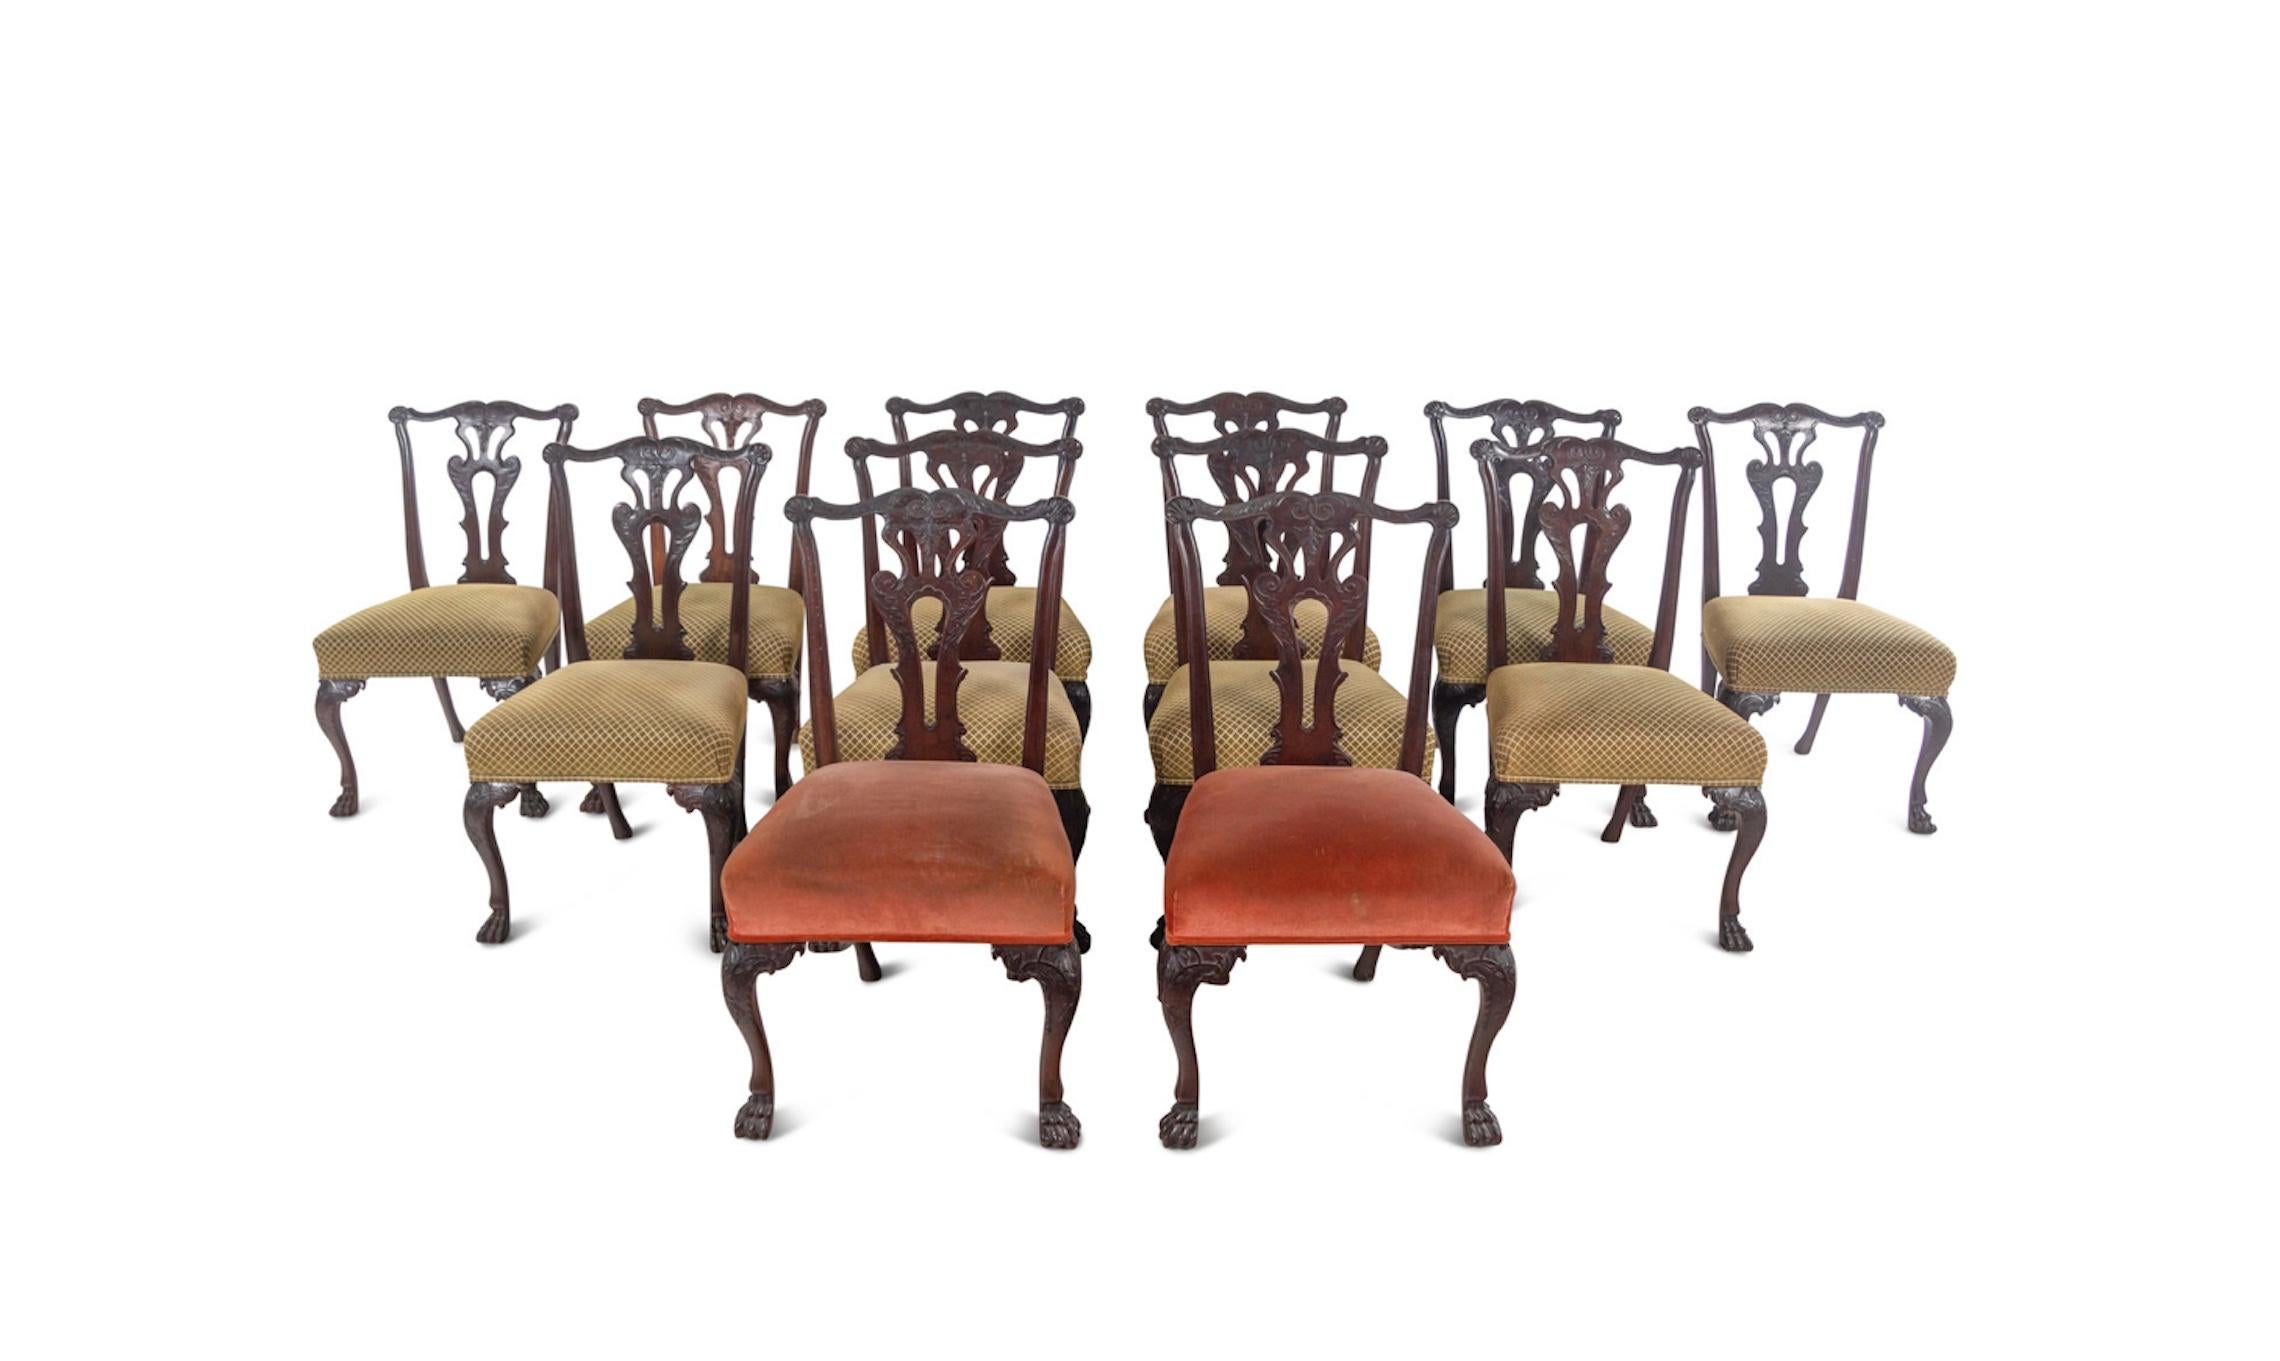 A Set of Twelve George II Style Mahogany Dining Chairs 19th Century, great scale For Sale 1